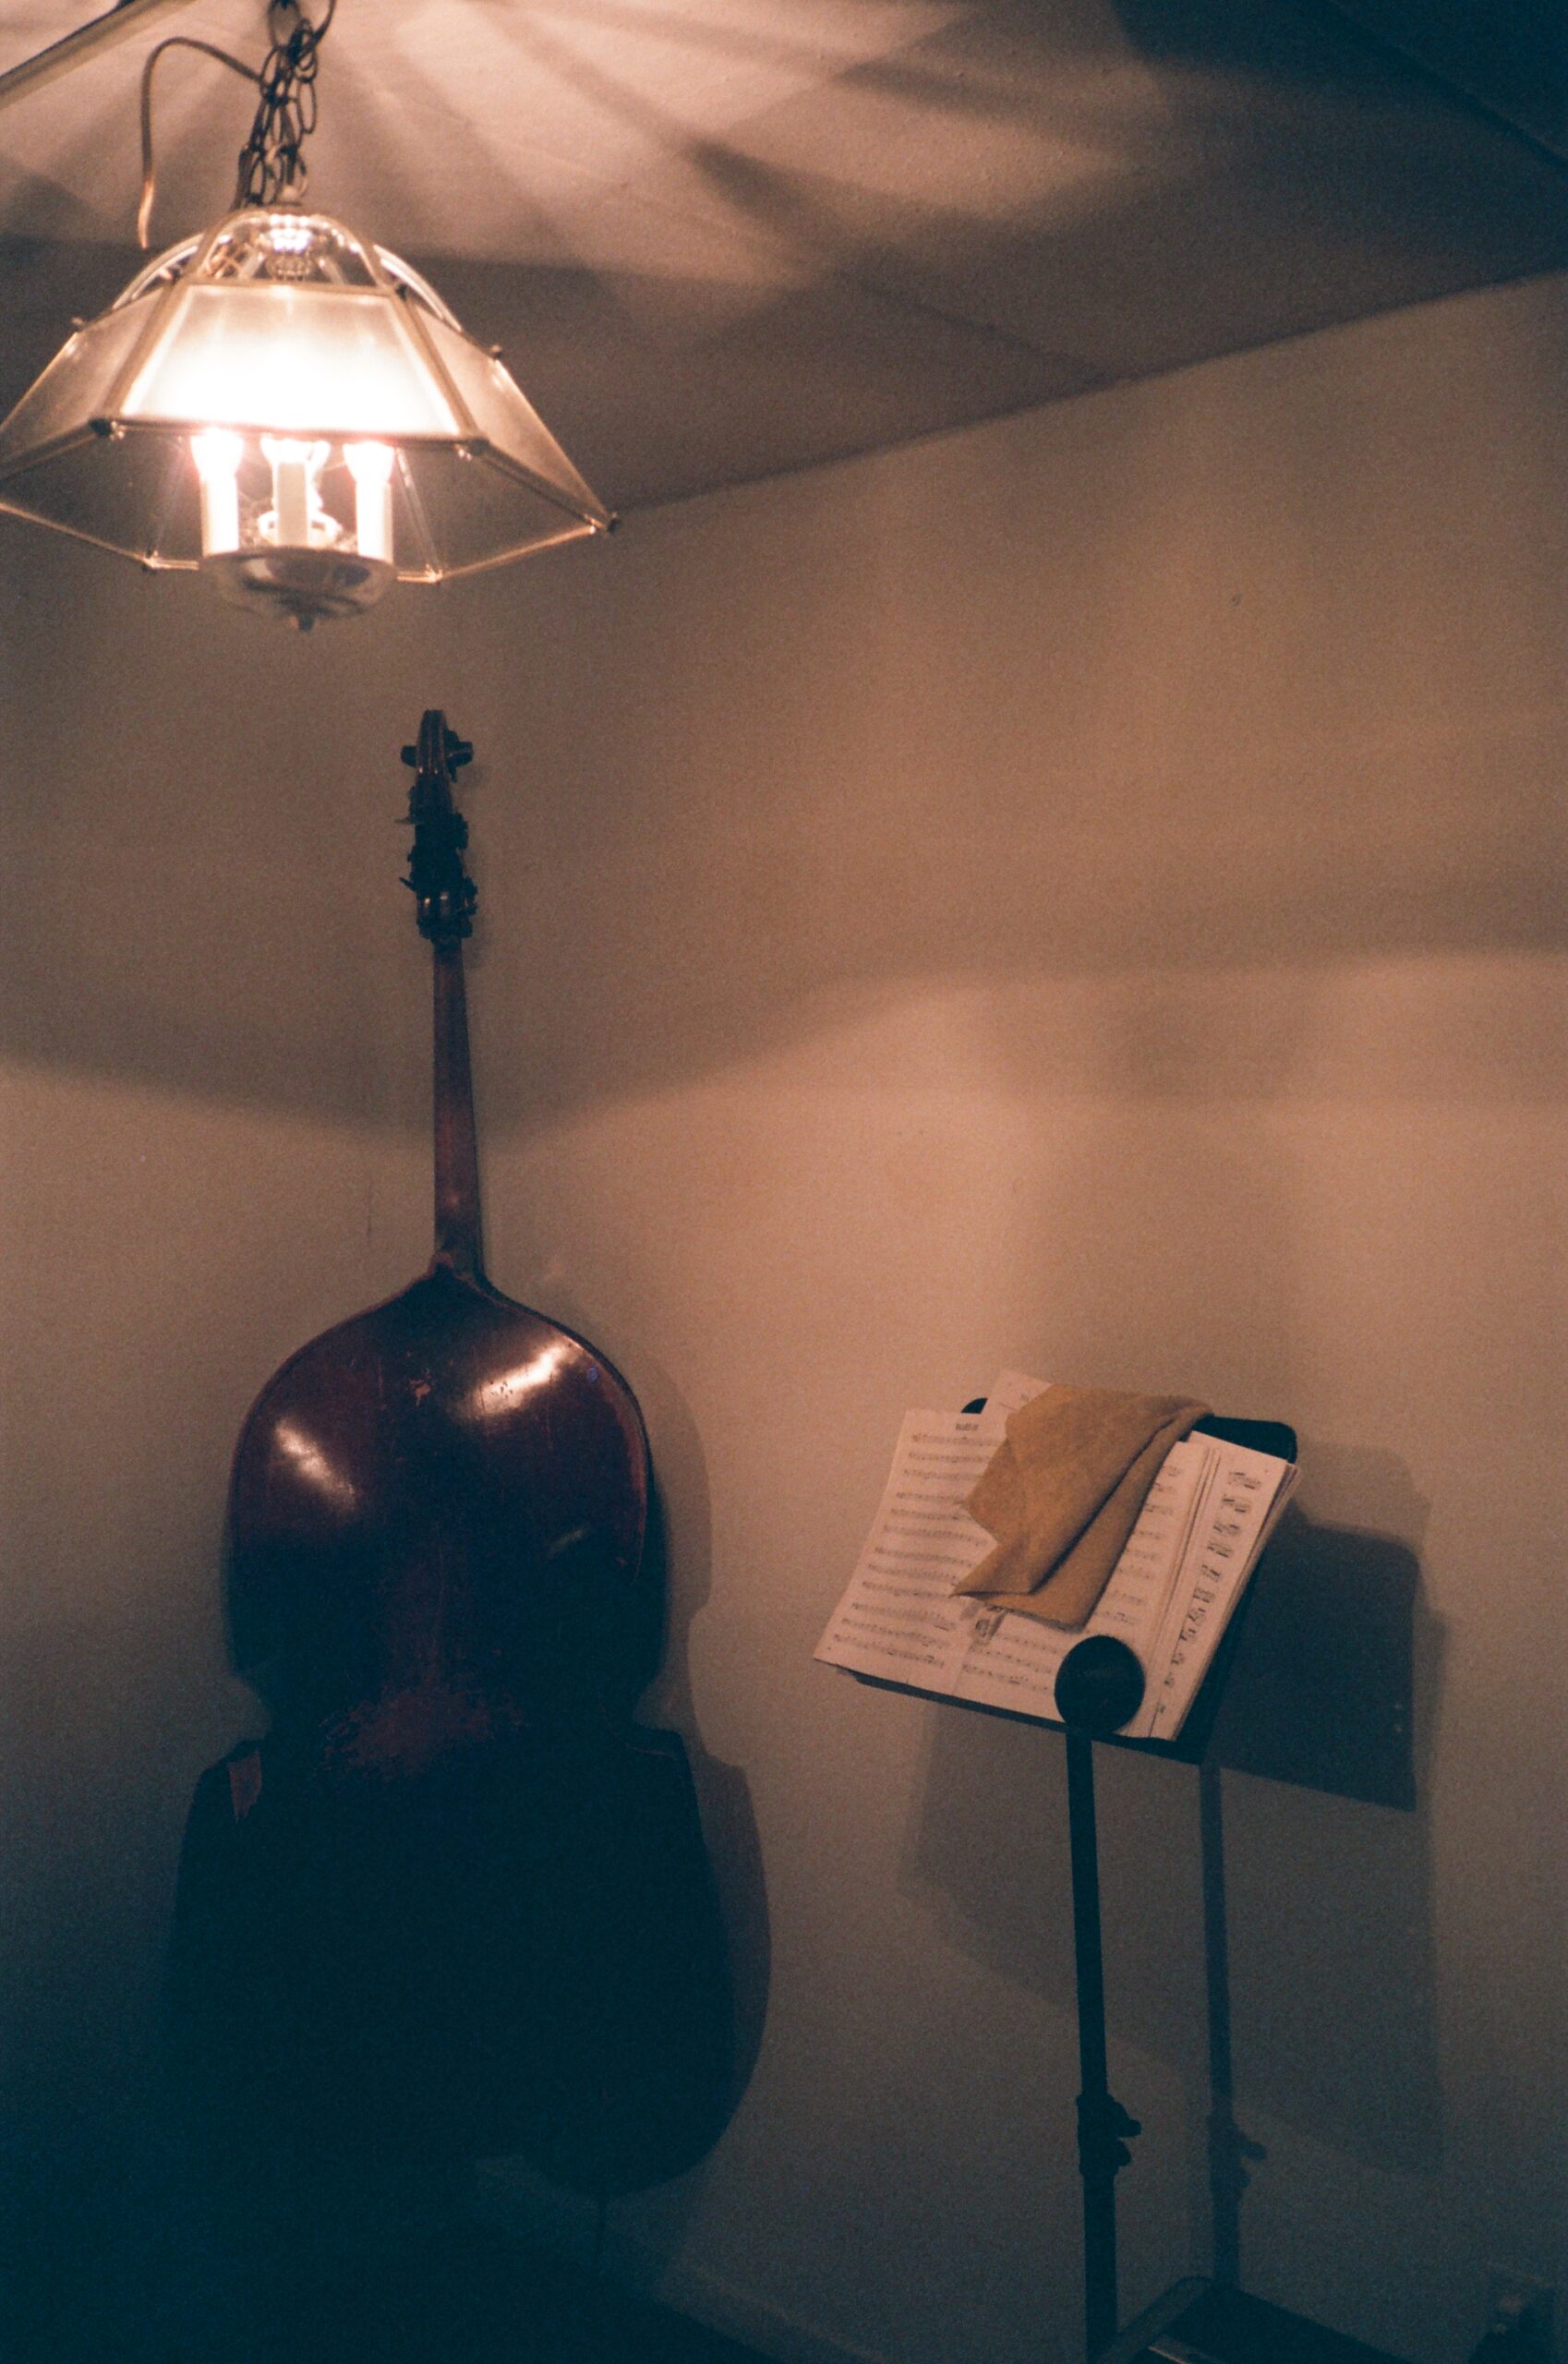 double bass leans against a white wall next to a music stand